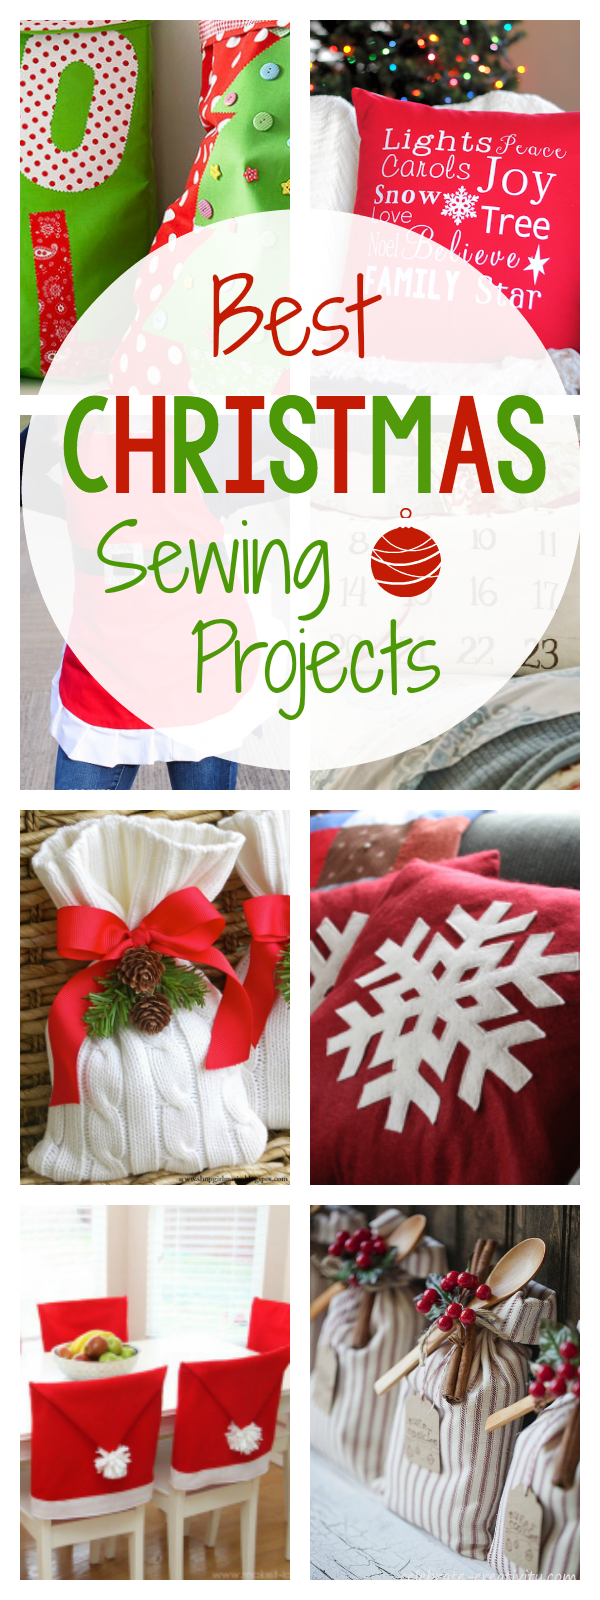 Best Christmas Sewing Projects for the Holidays